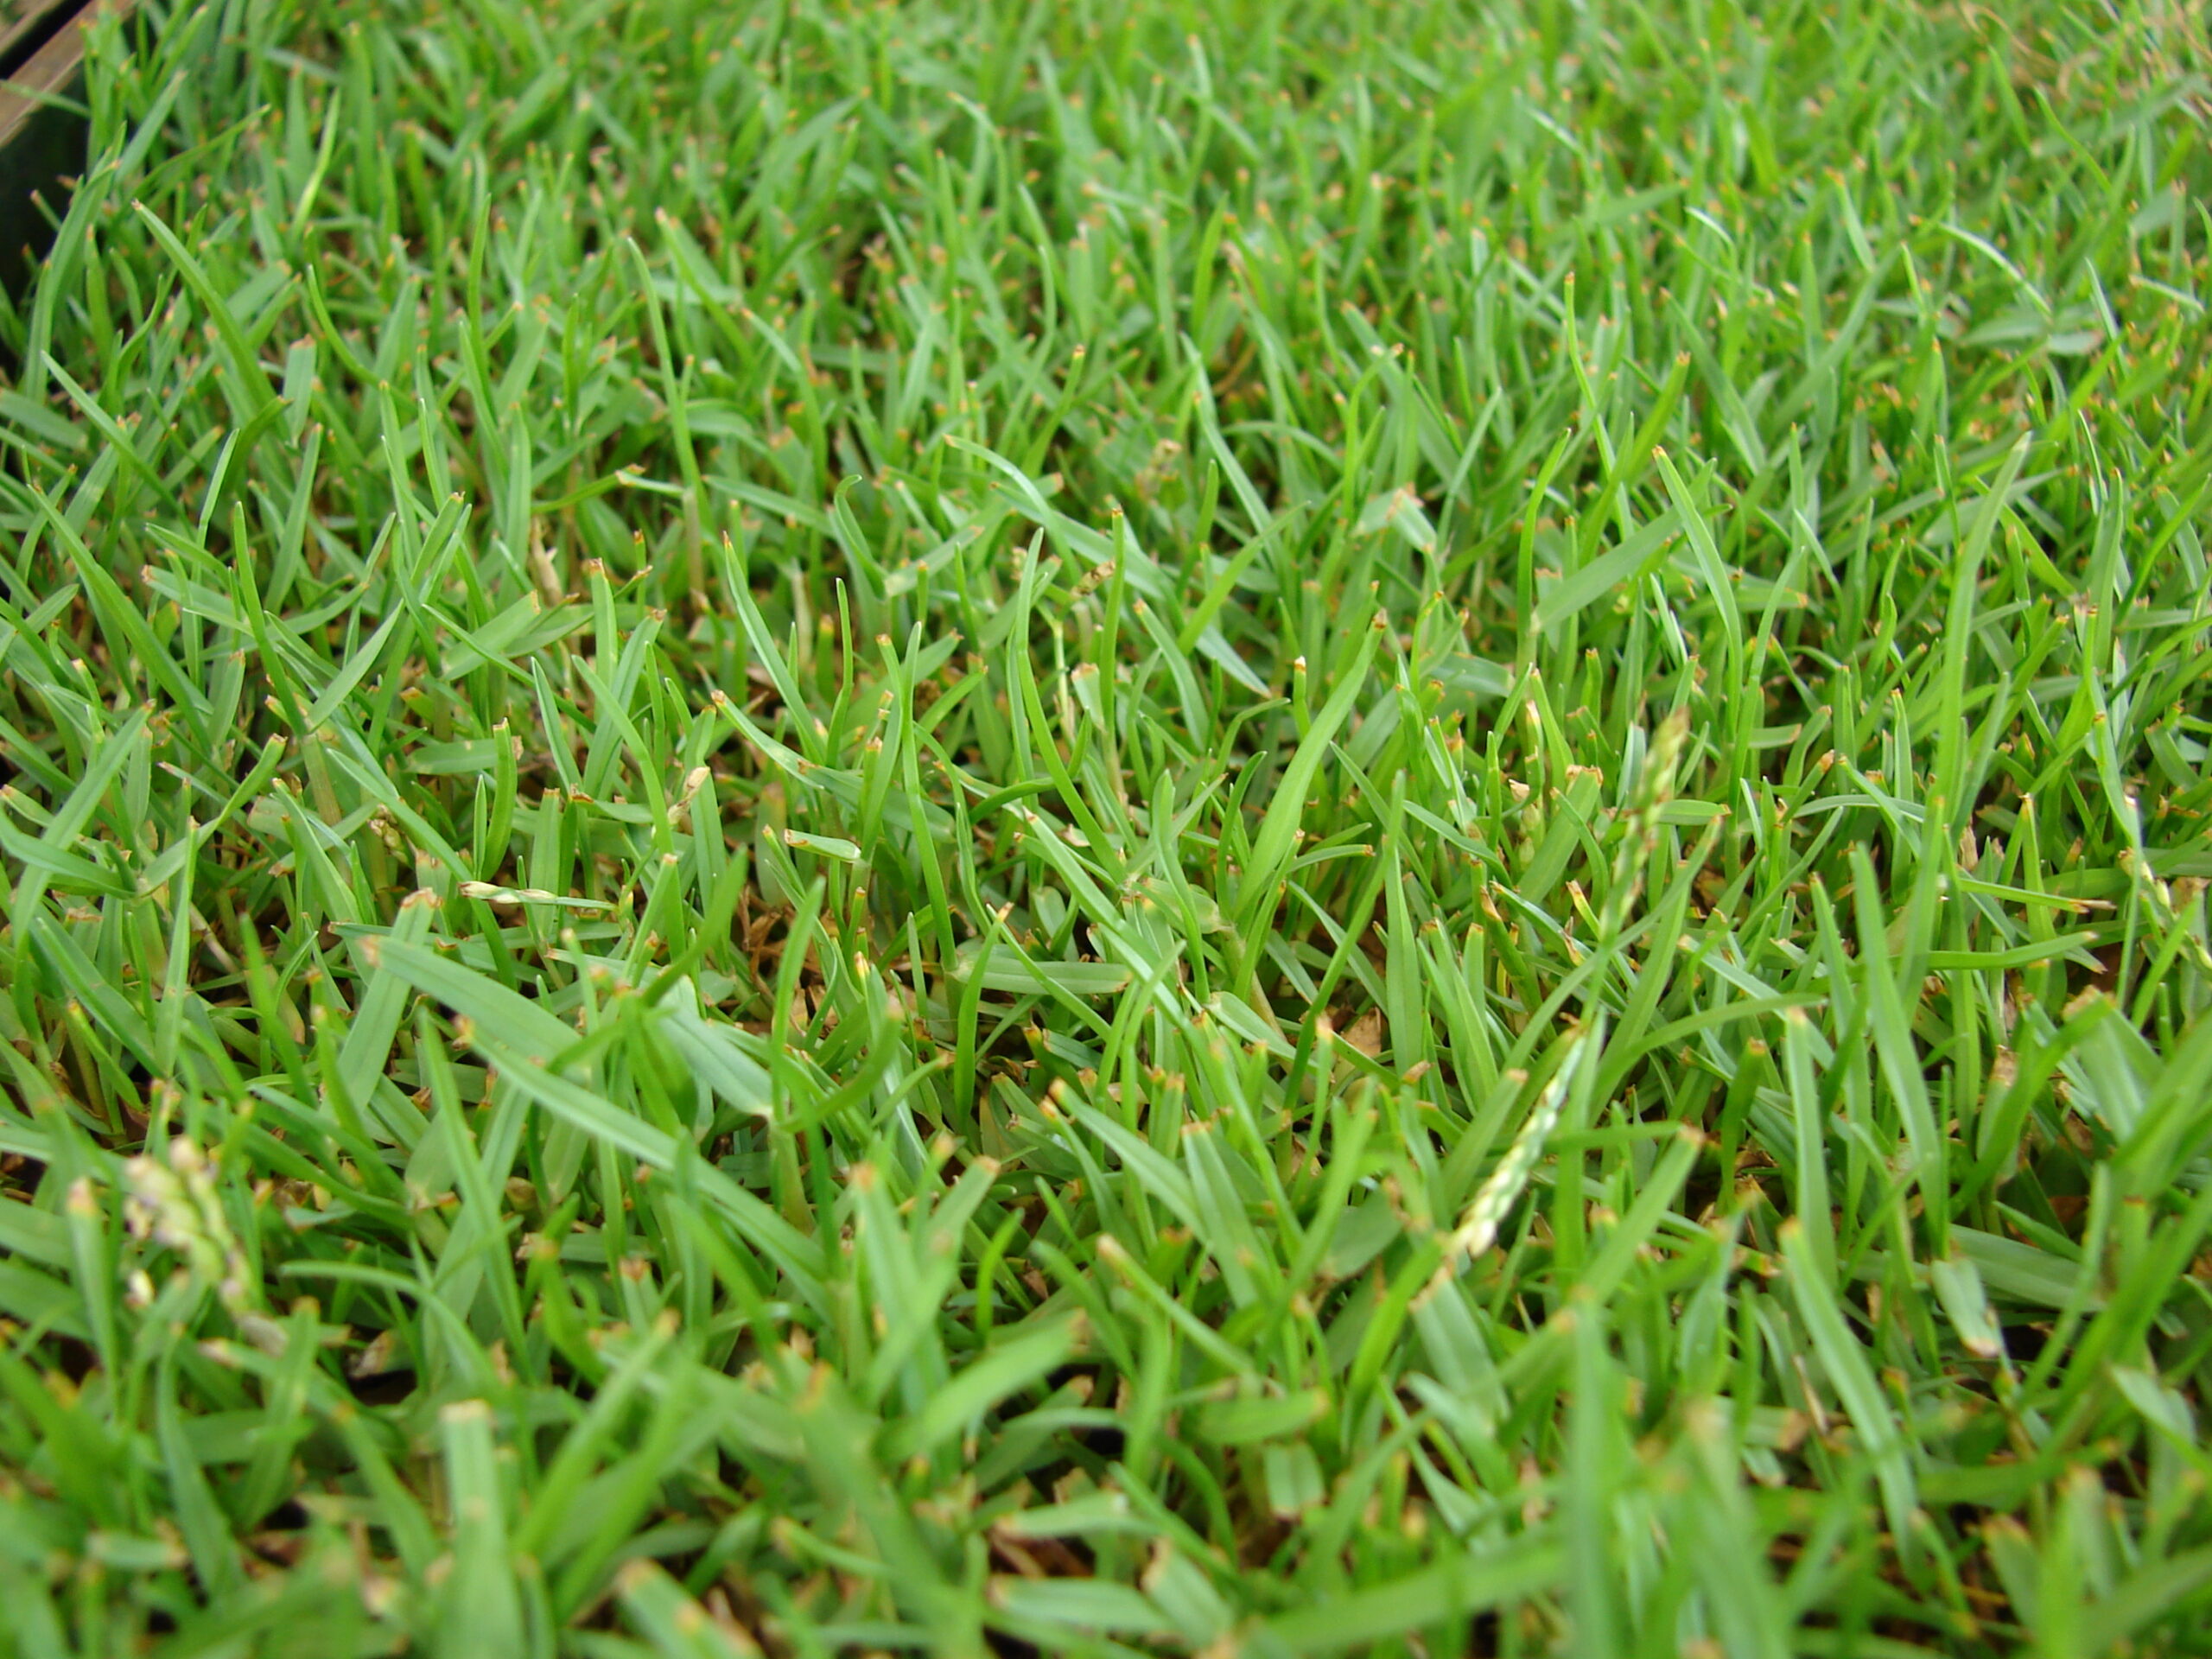 zoysia-grass-for-florida-lawns-green-earth-solutions-inc-lawn-care